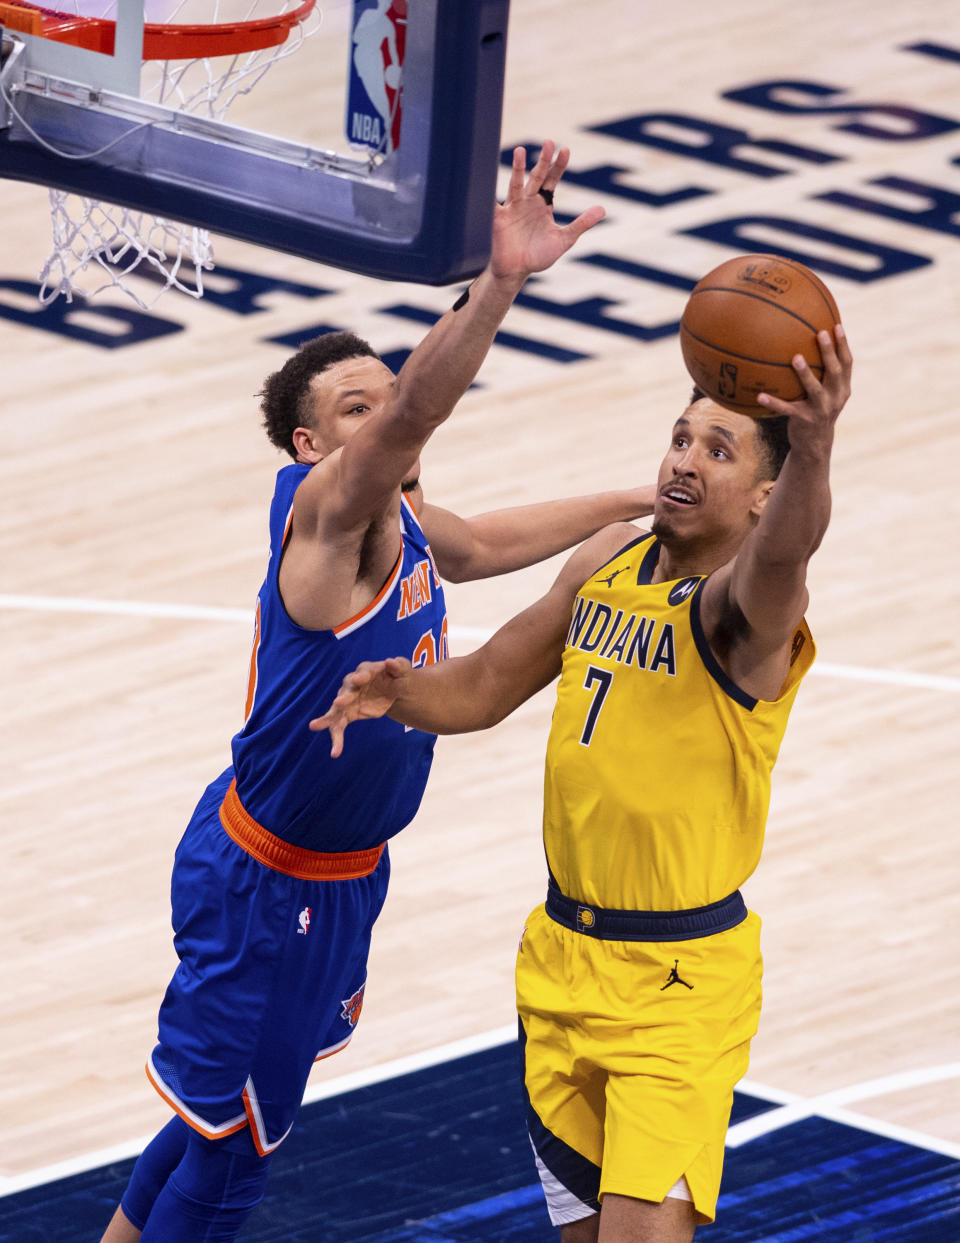 Indiana Pacers guard Malcolm Brogdon (7) makes a move around the defense of New York Knicks forward Kevin Knox II (20) during the first half of an NBA basketball game in Indianapolis, Saturday, Jan. 2, 2021. (AP Photo/Doug McSchooler)